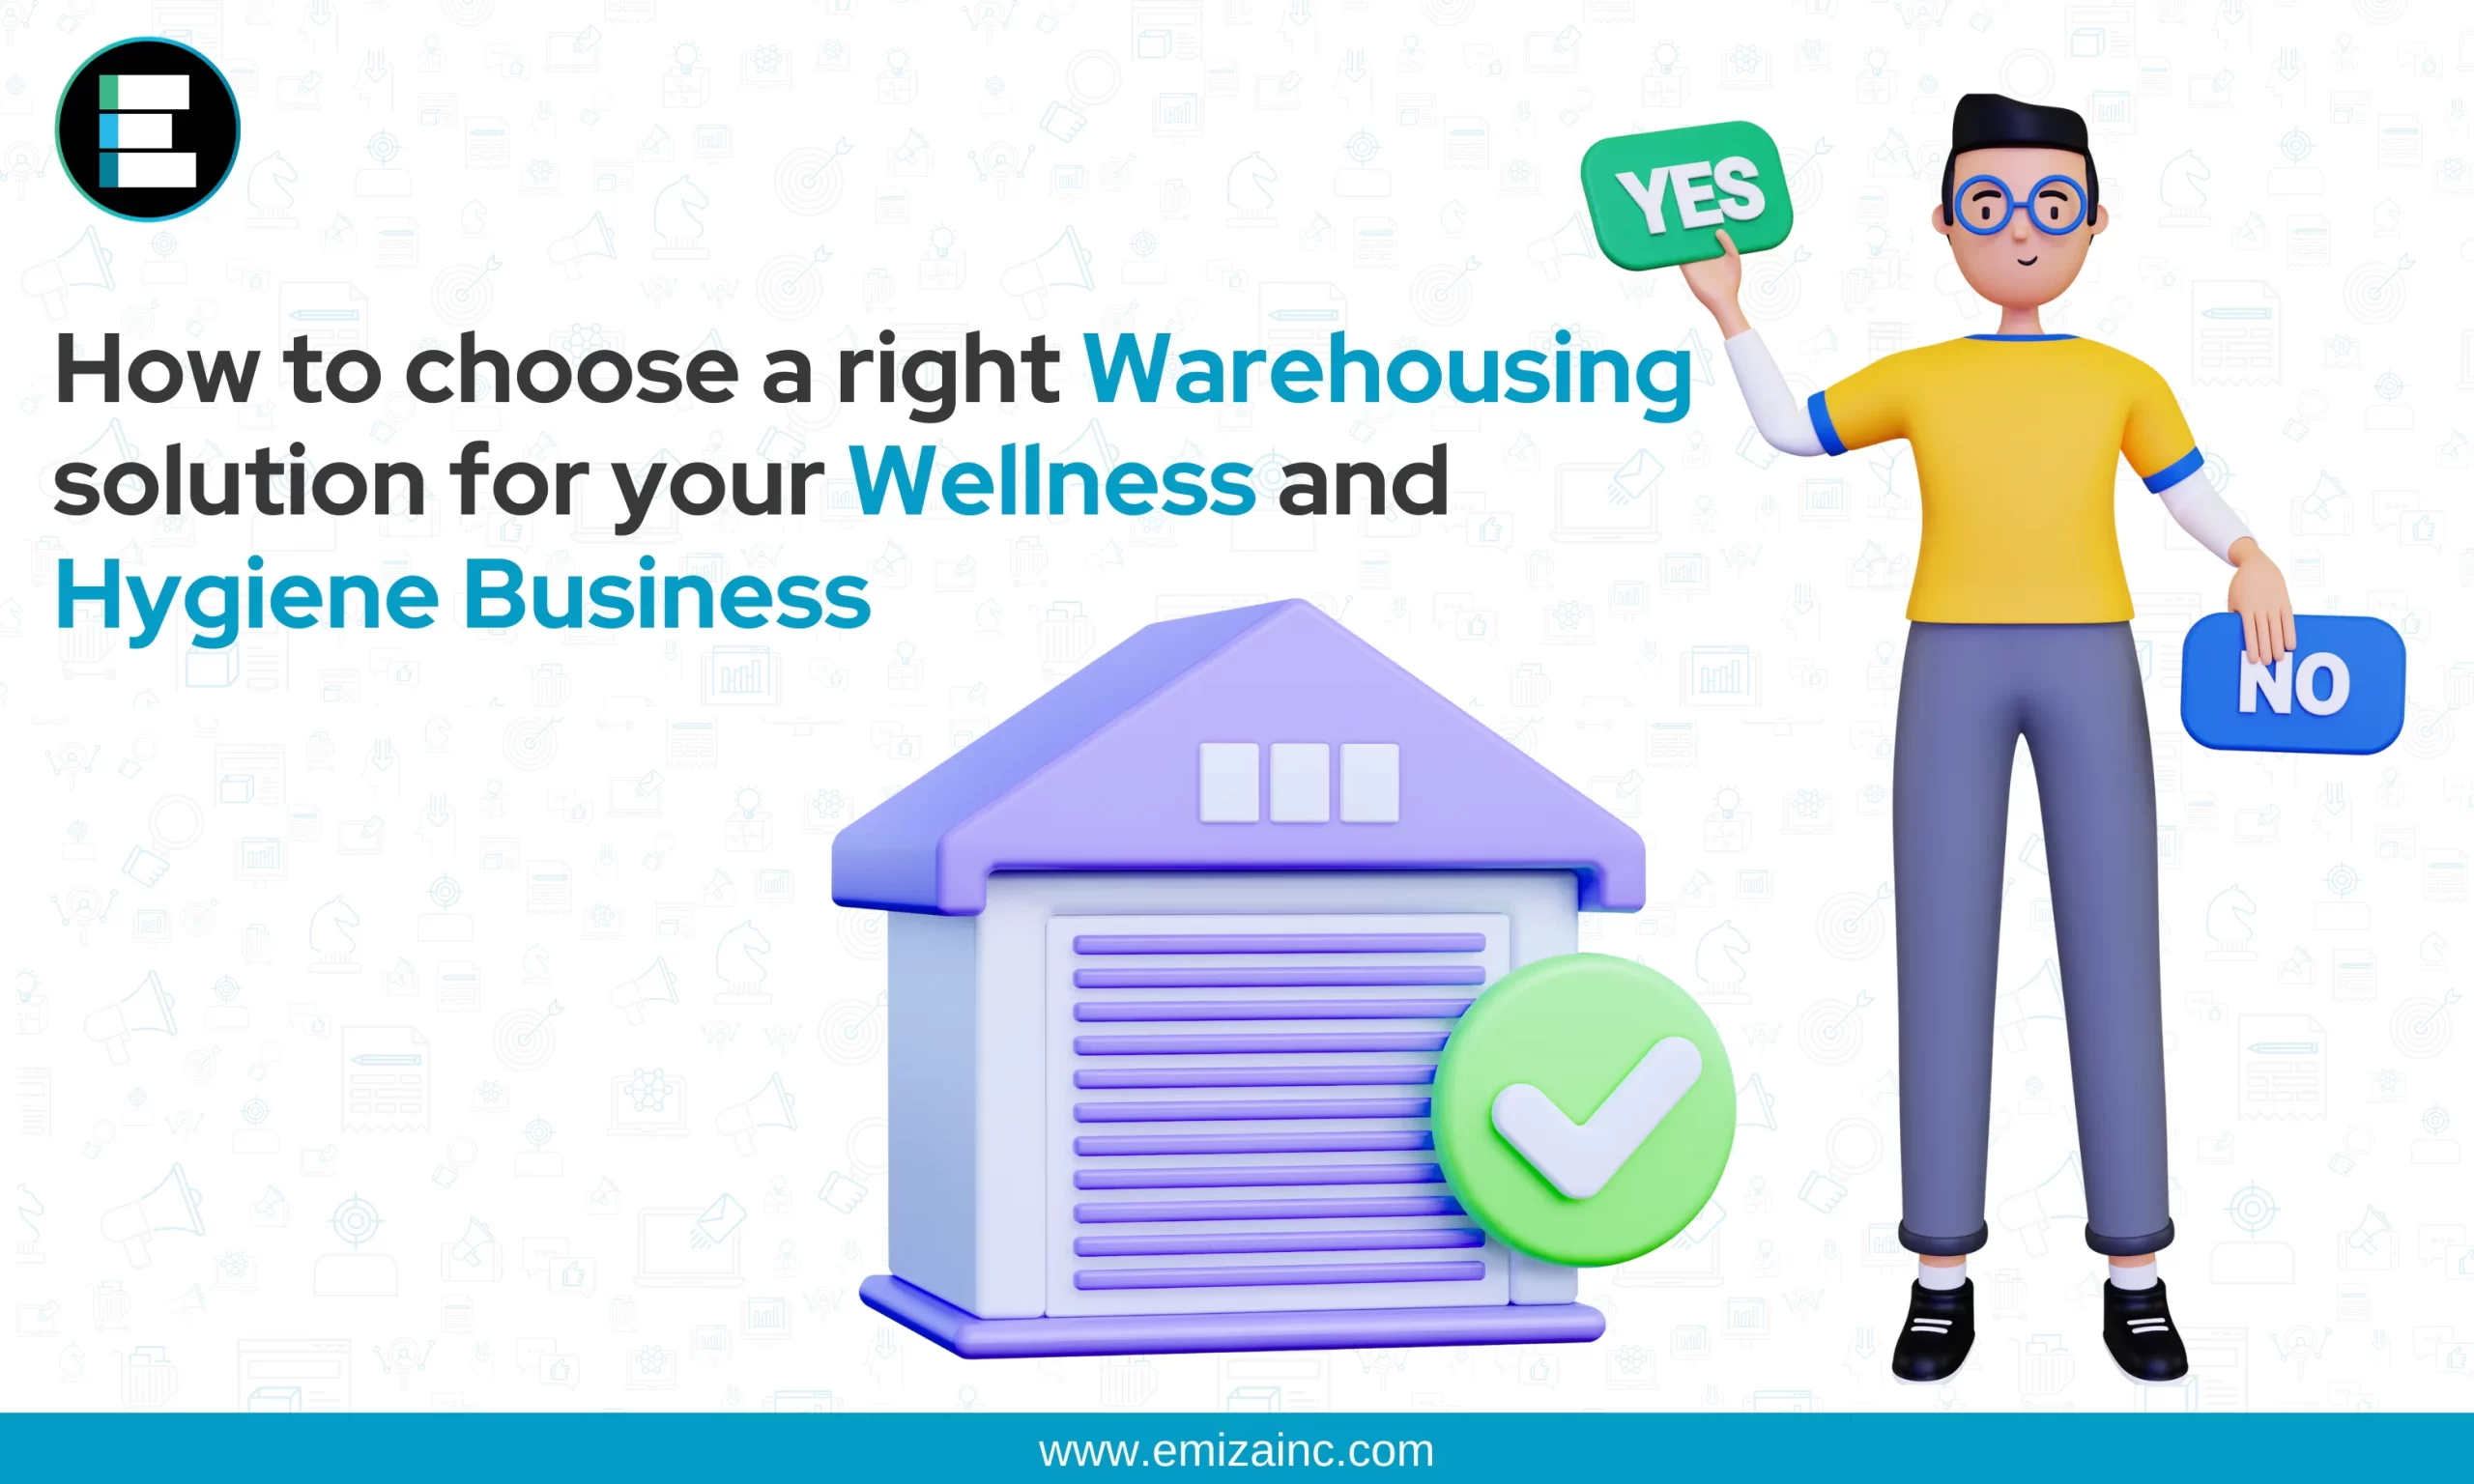 How to Choose the Right Warehousing Solution for Your Wellness and Hygiene Business